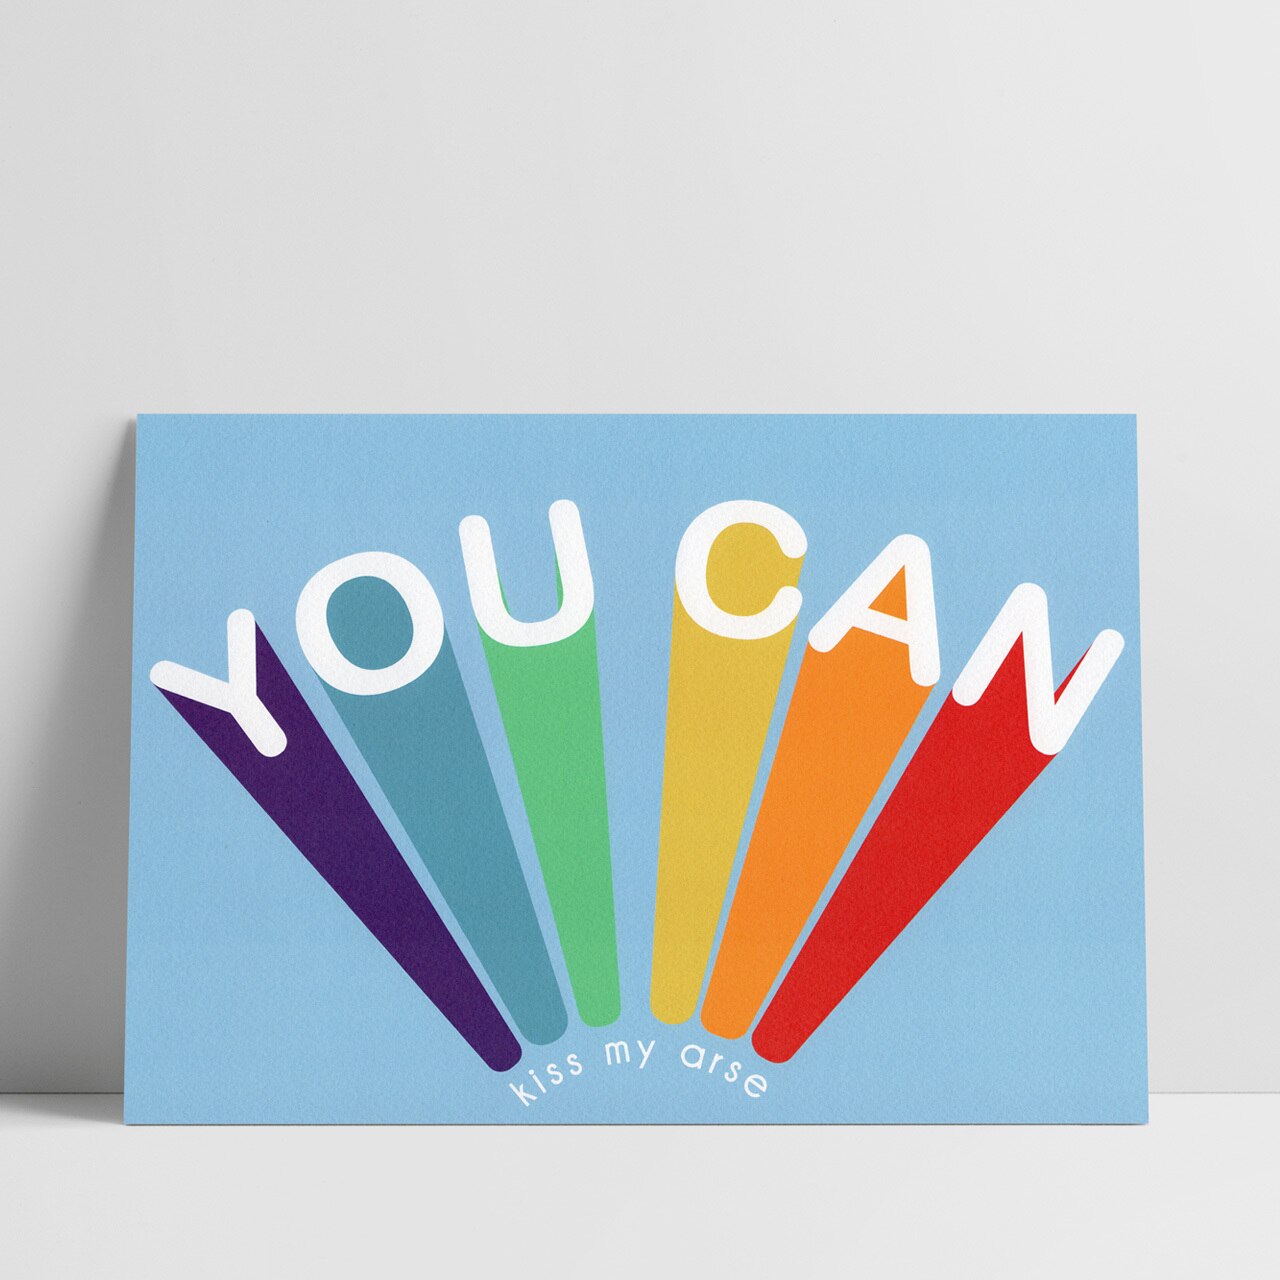 You Can... A4 Art Print